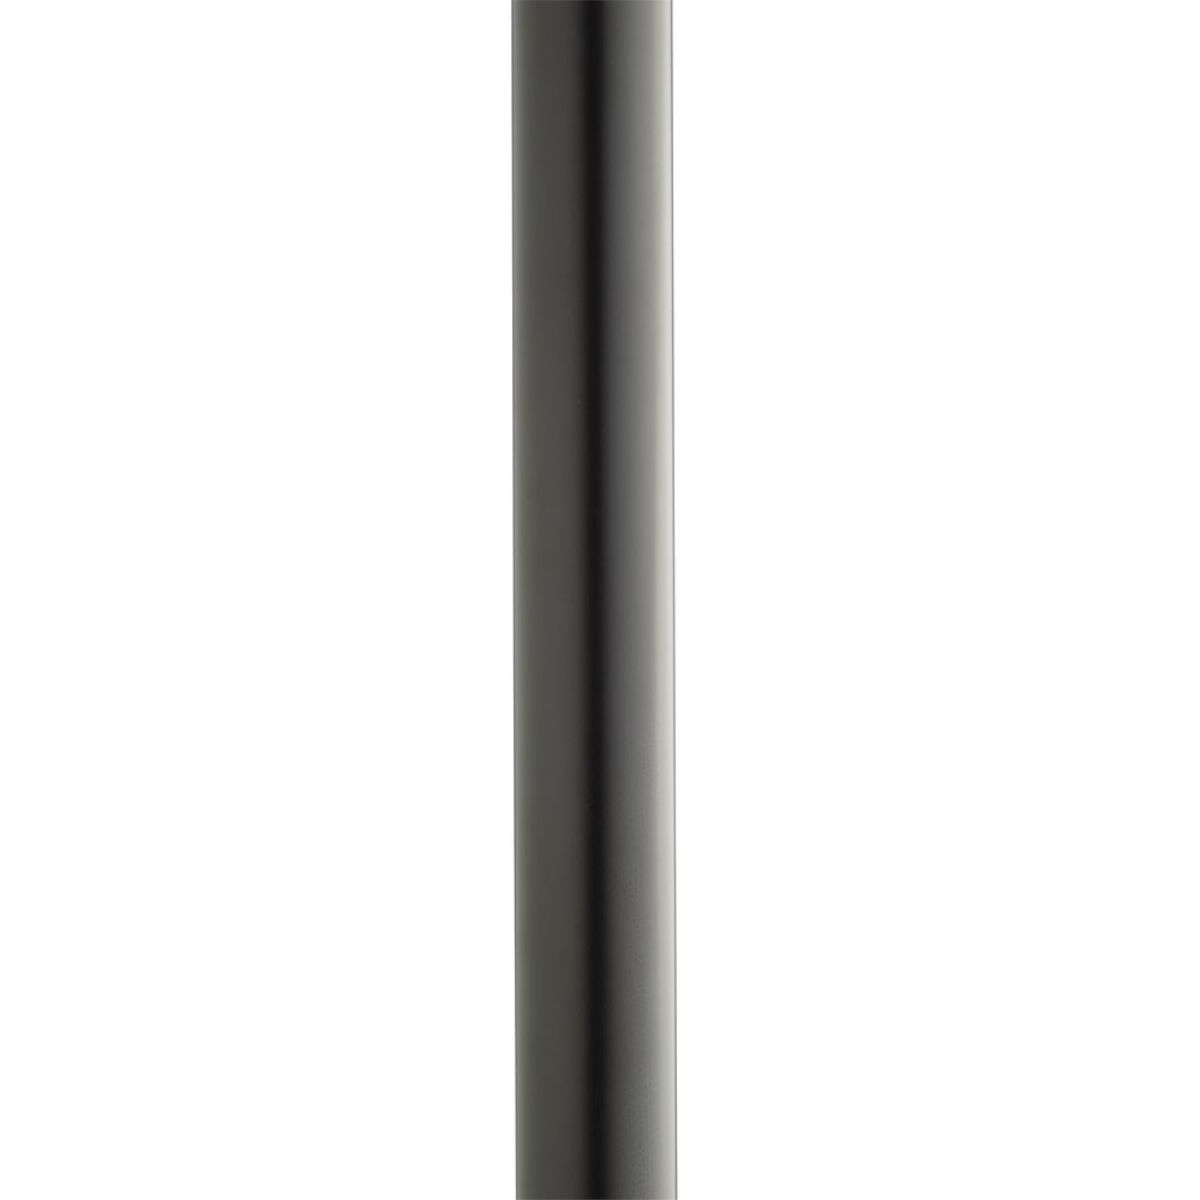 7 Feet Round Aluminum Direct Burial Pole With Ladder Rest 3 In. Shaft Black finish